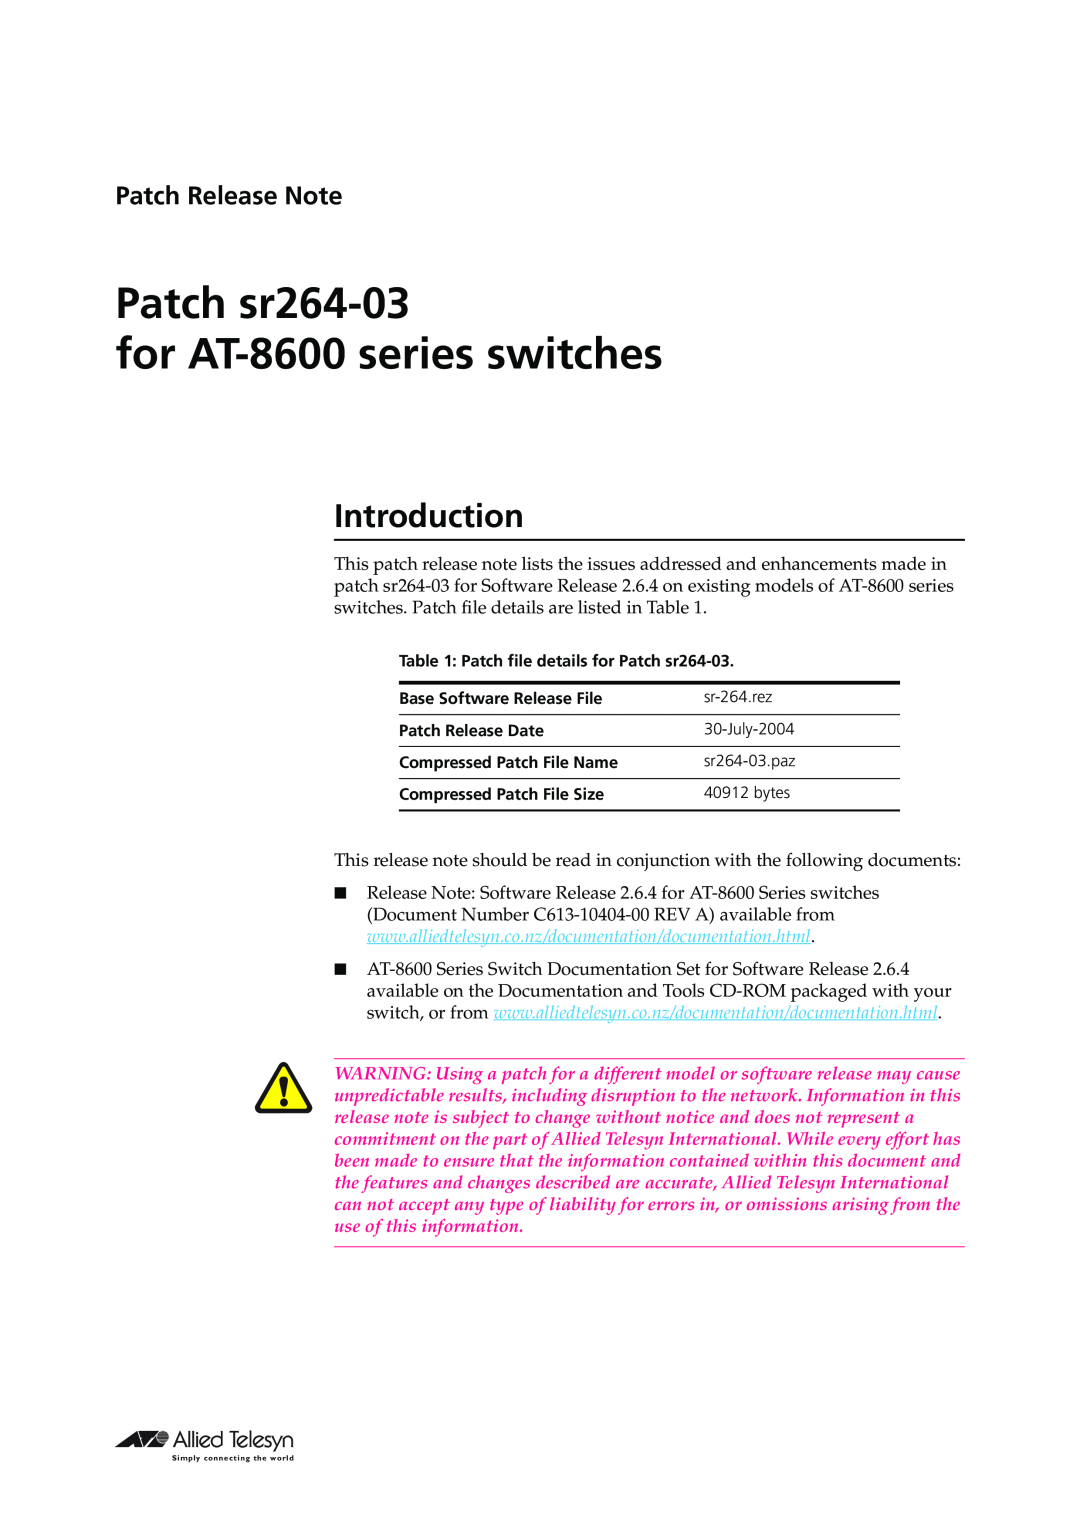 Allied Telesis manual Introduction, Patch Release Note, Patch sr264-03 for AT-8600 series switches 